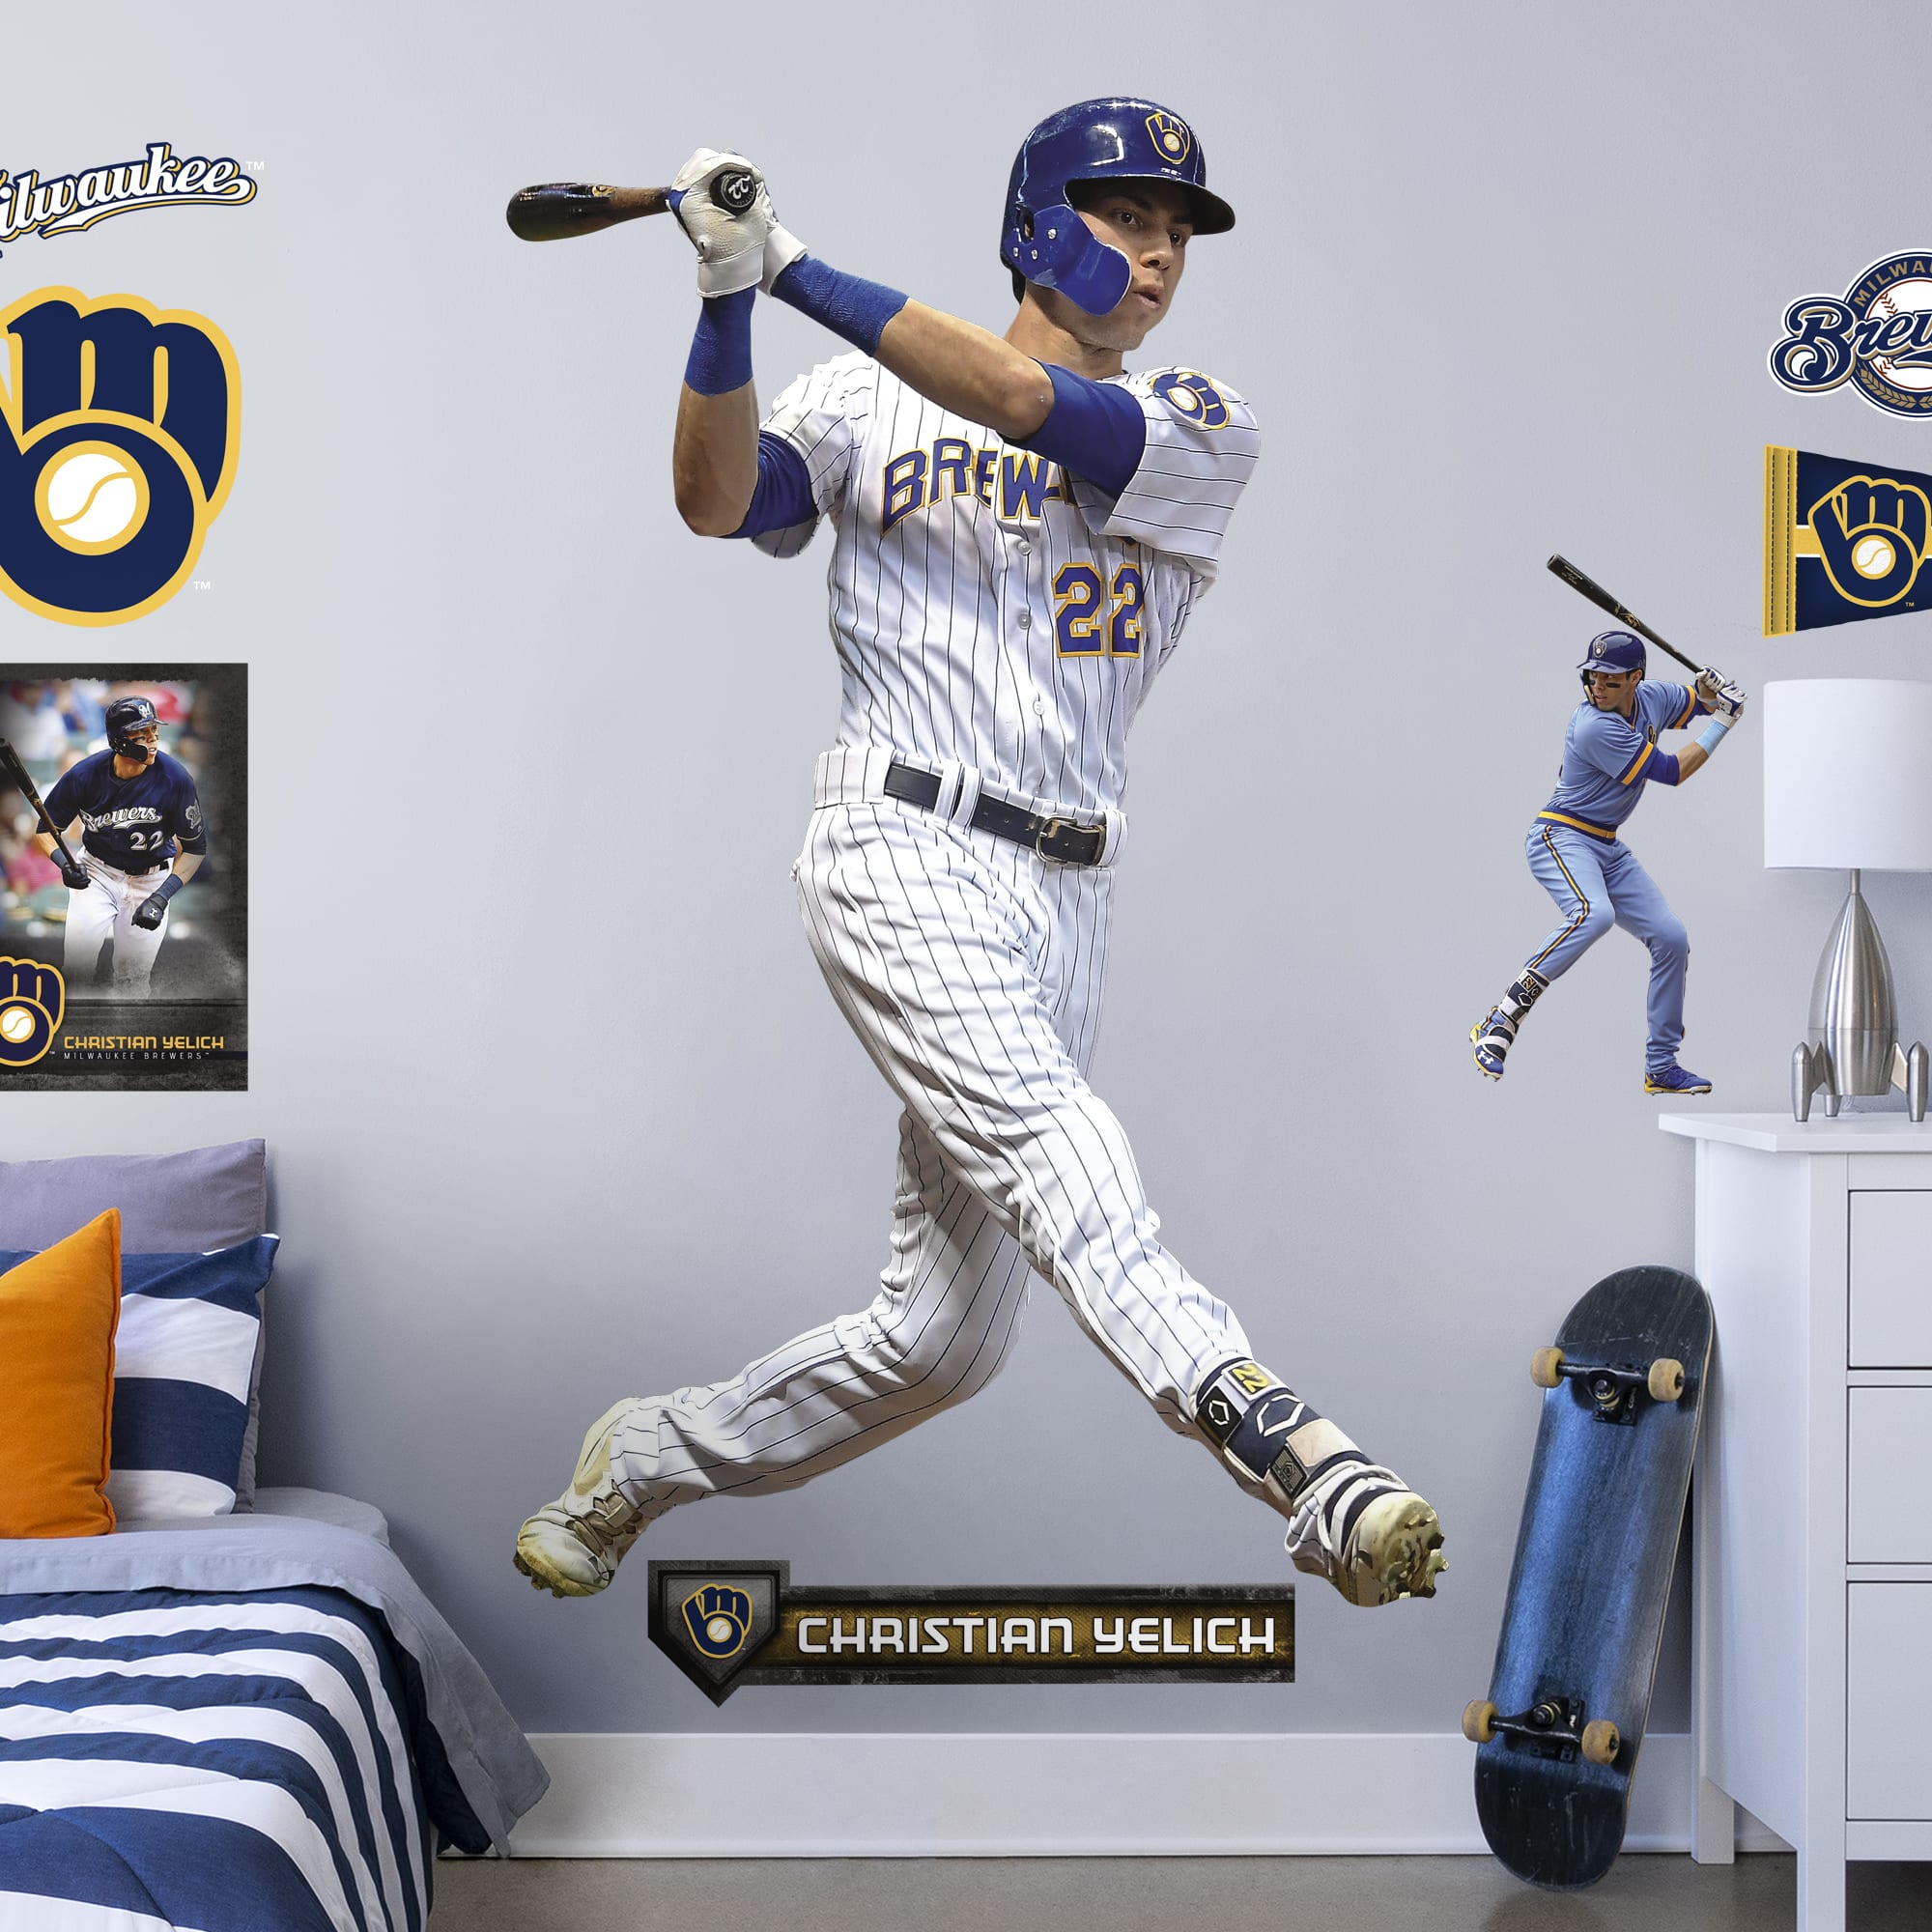 Christian Yelich for Milwaukee Brewers - Officially Licensed MLB Removable Wall Decal Life-Size Athlete + 12 Decals (48"W x 78"H